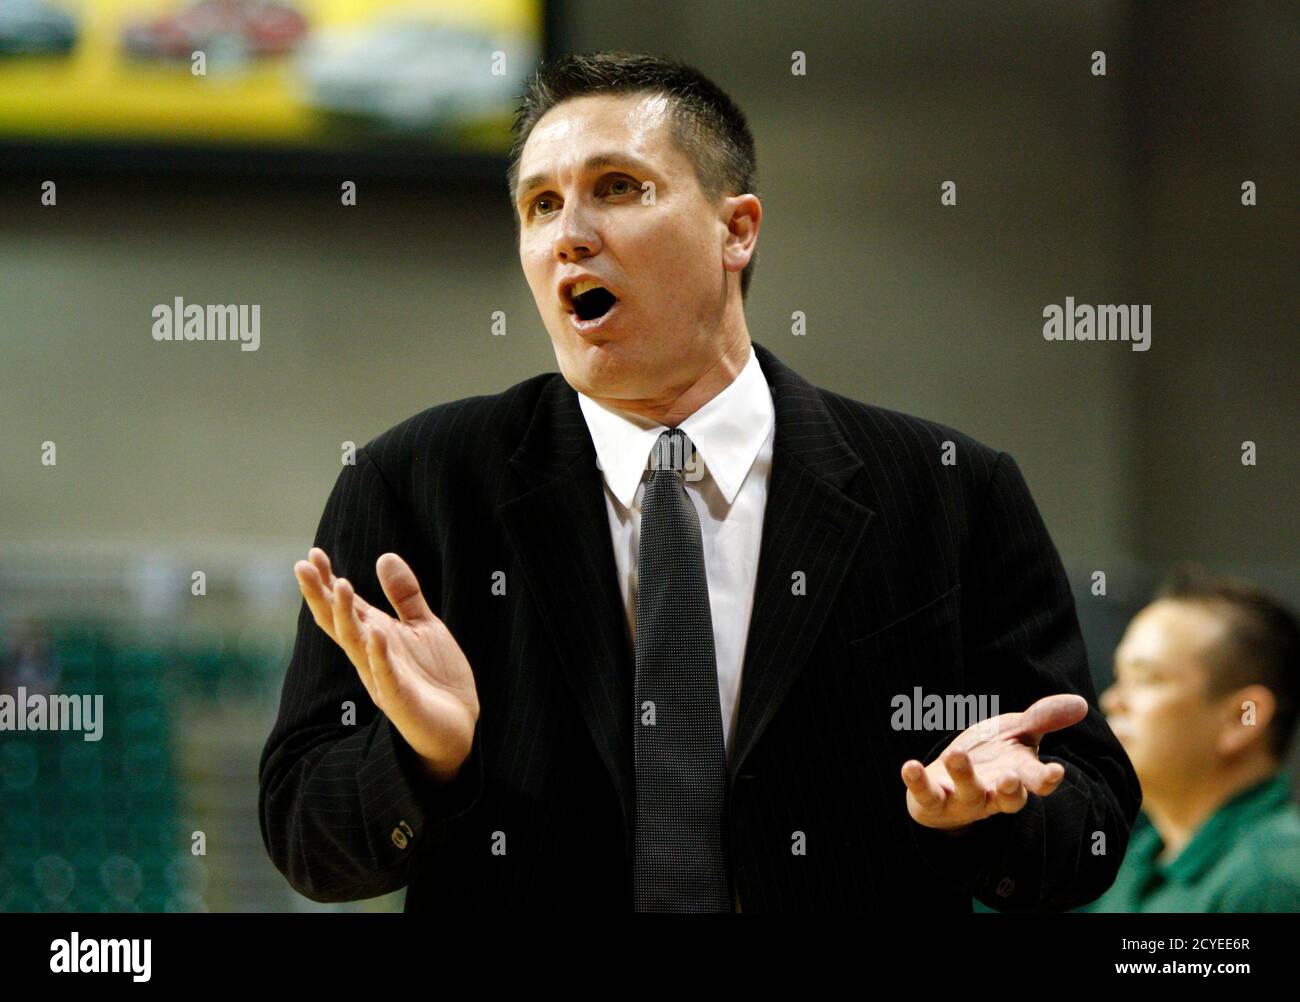 San Francisco Dons Head Coach Rex Walters reacts to a referee's call during their West Coast Conference Championships basketball game at the Orleans Arena in Las Vegas, Nevada March 1, 2012.  REUTERS/Steve Marcus (UNITED STATES - Tags: SPORT BASKETBALL) Stock Photo